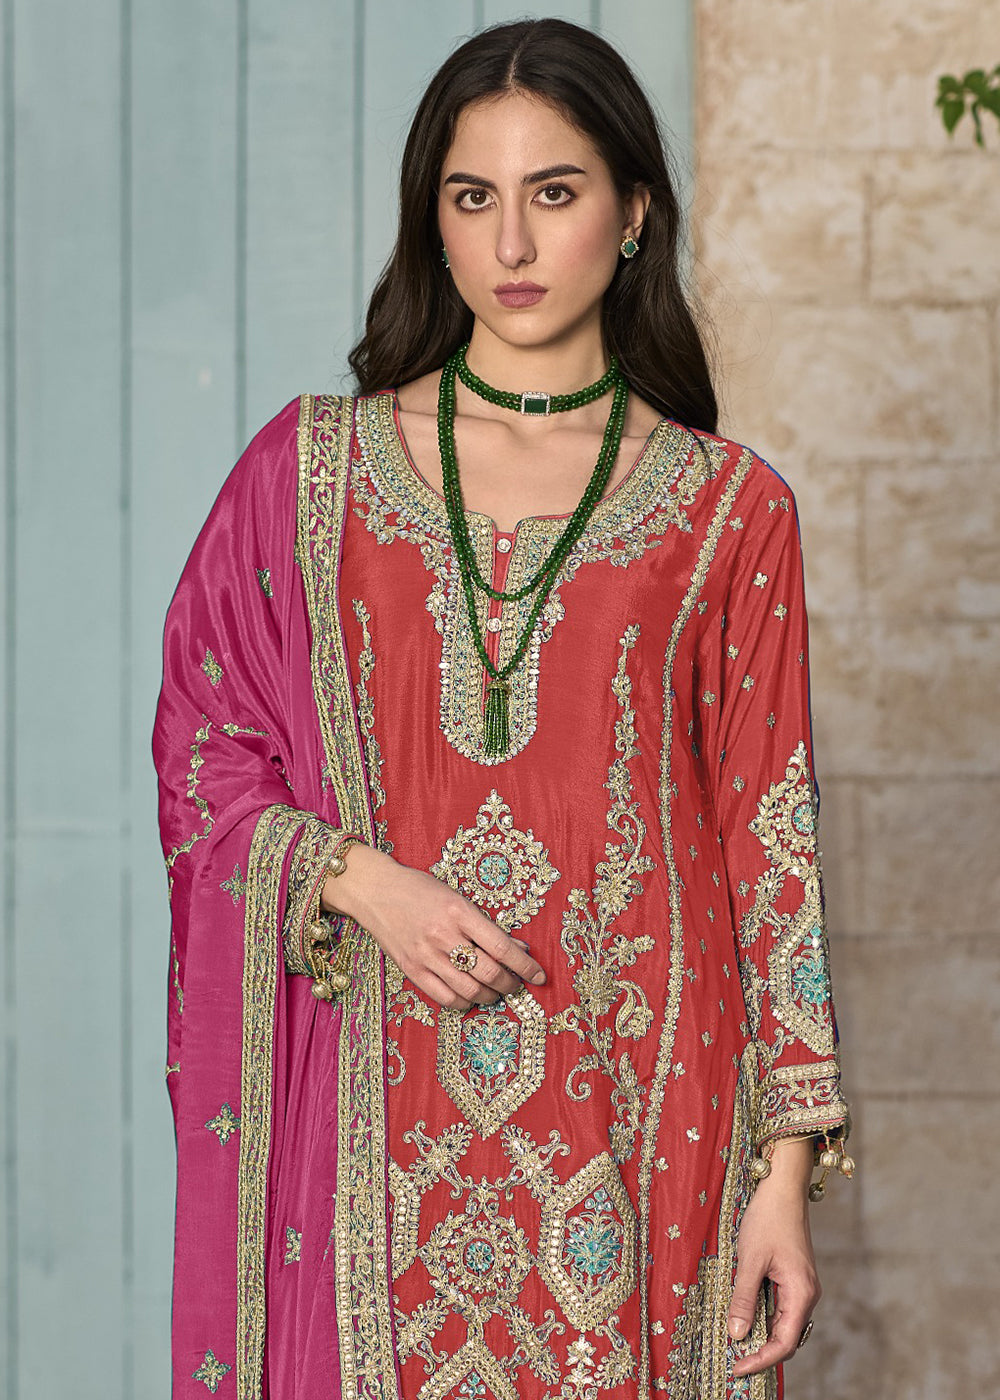 Buy Now Orange & Pink Pure Chinnon Embroidered Afghani Style Dress Online in USA, UK, Canada, Germany, Australia & Worldwide at Empress Clothing.